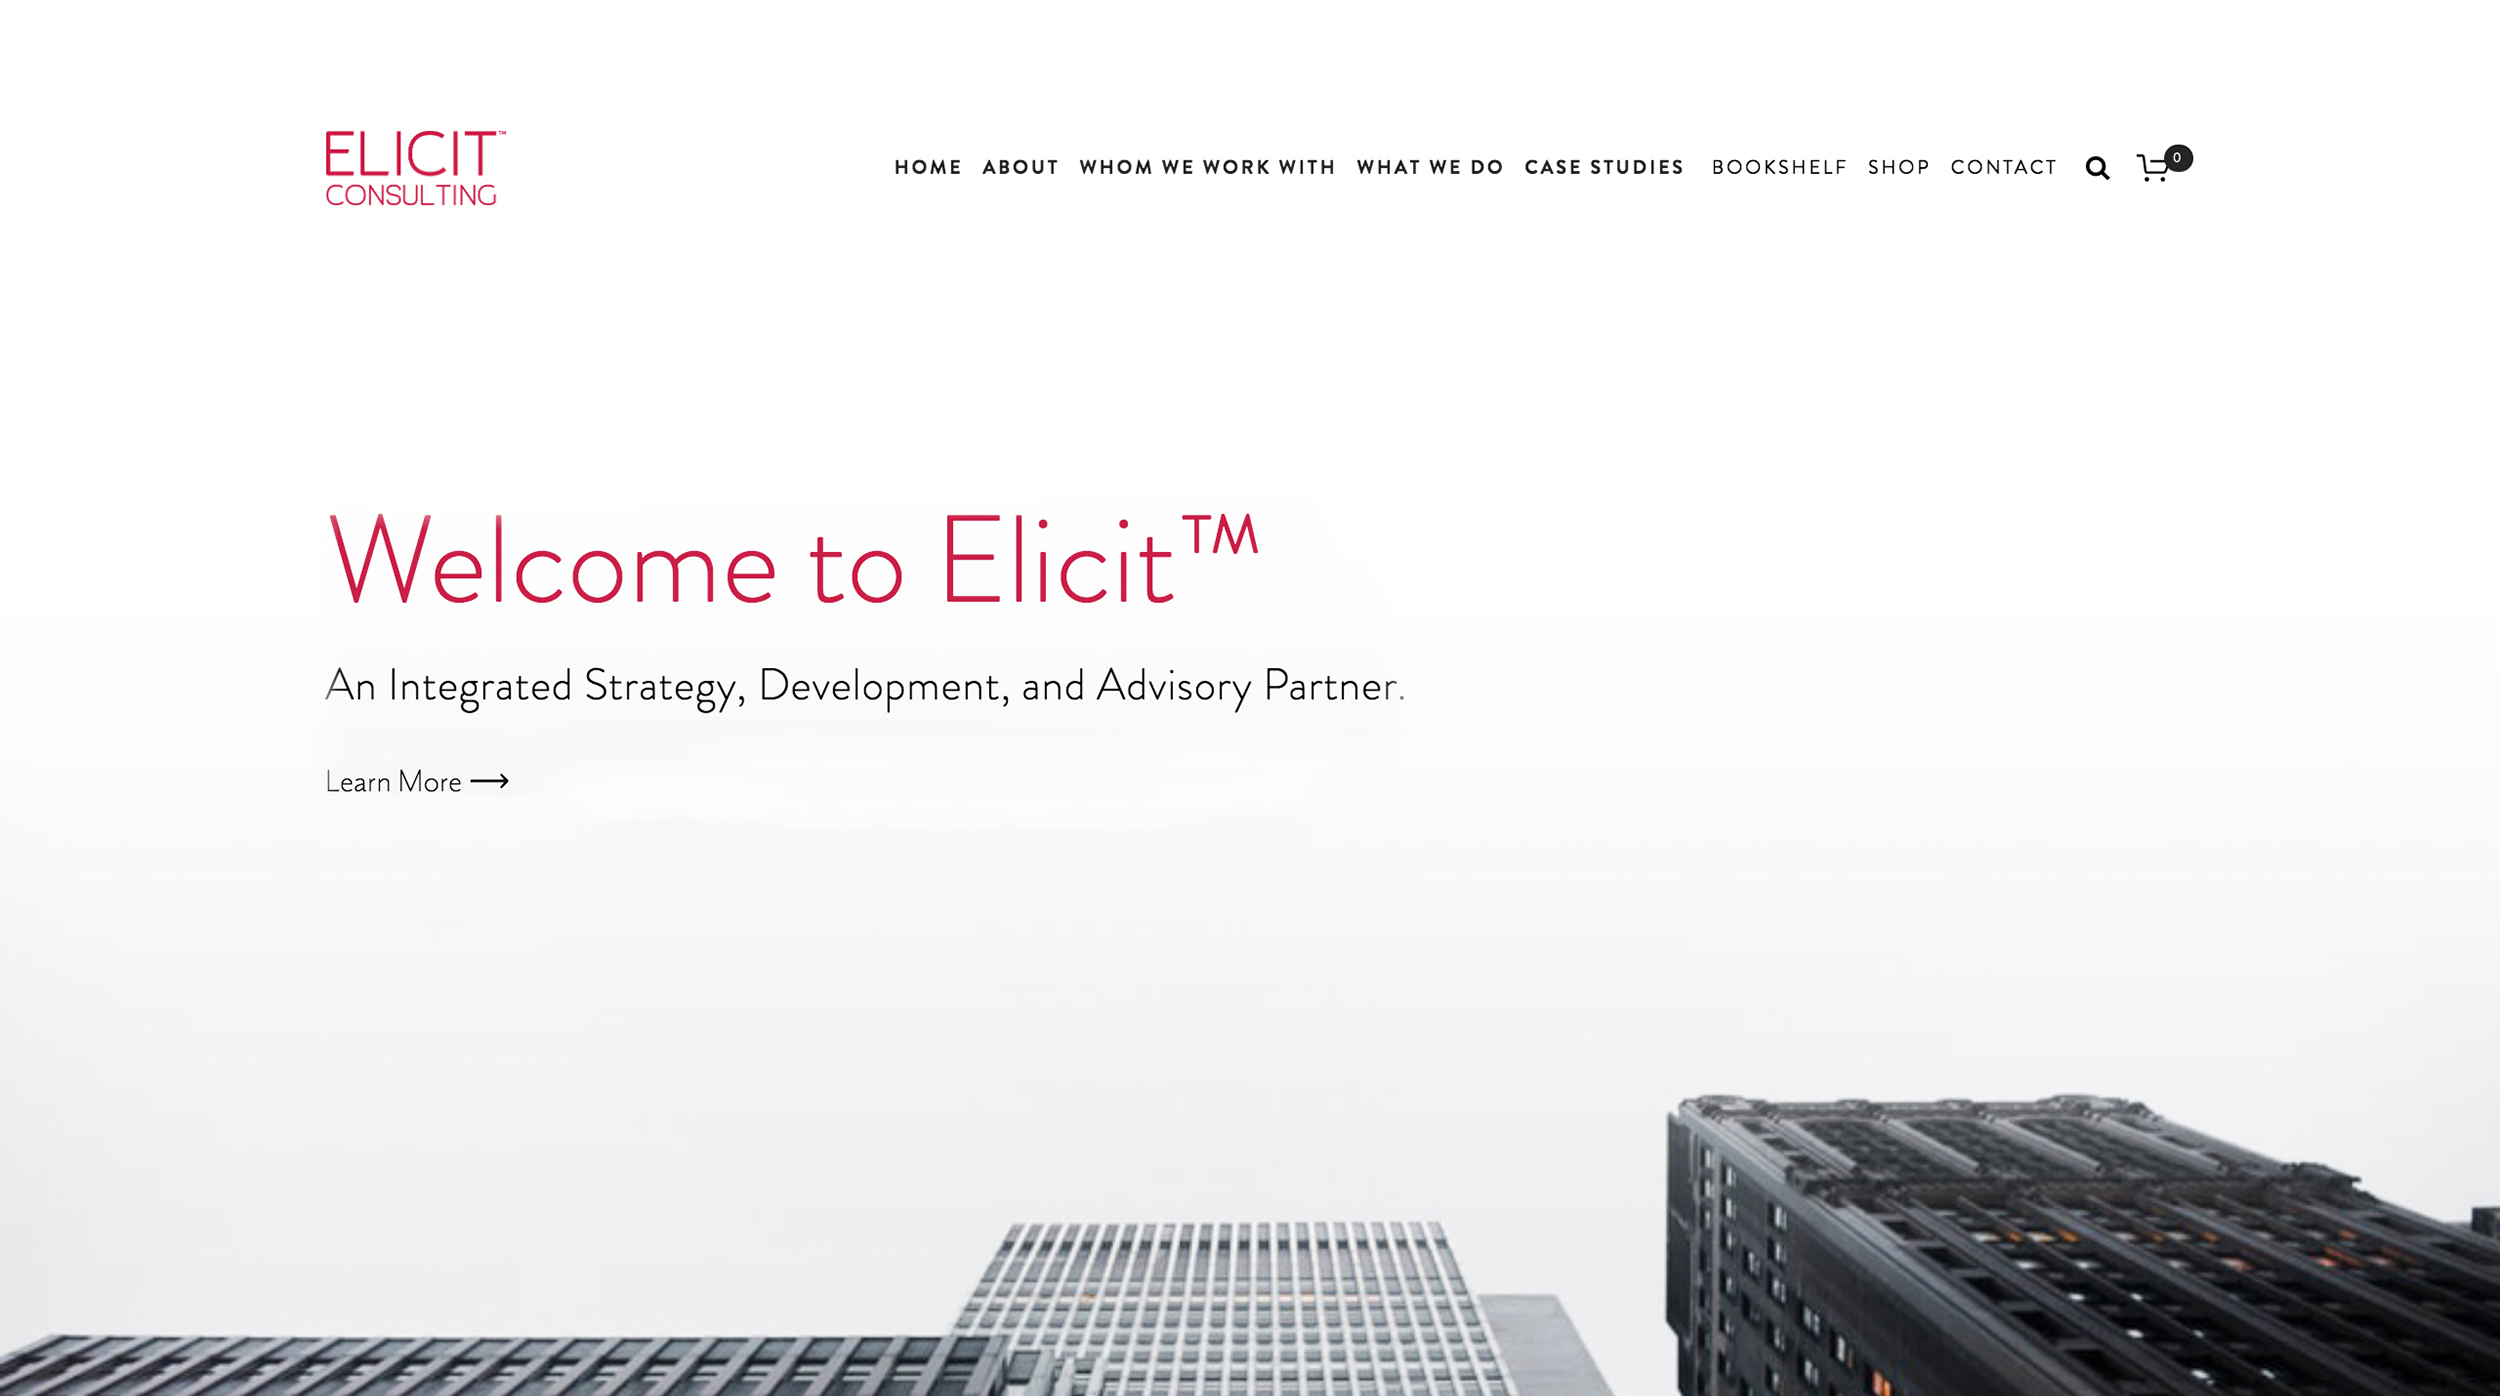 The Elicit™ home page, featuring a gray city scene from below. The headline says 'Welcome to Elicit™ An Integrated Strategy, Development, and Advisory Partner 